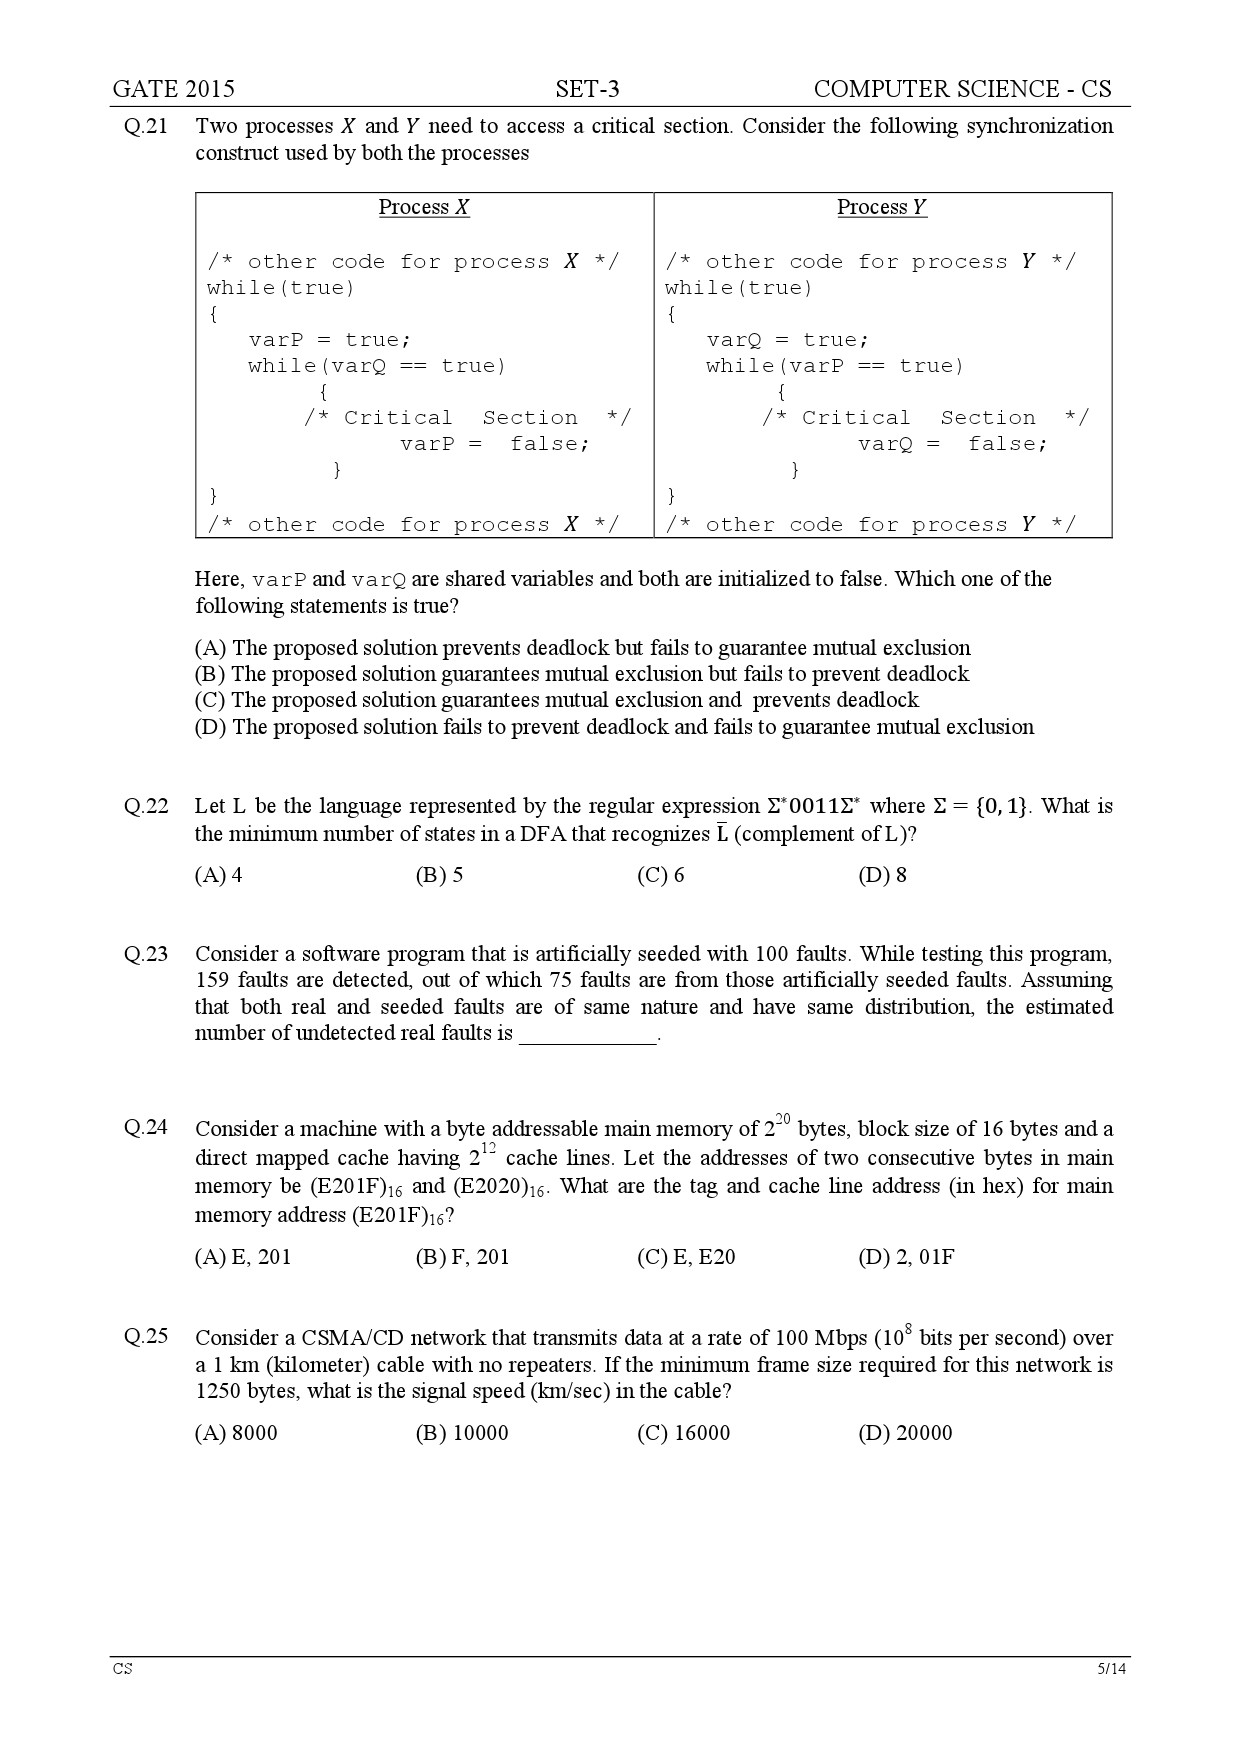 GATE Exam Question Paper 2015 Computer Science and Information Technology Set 3 5